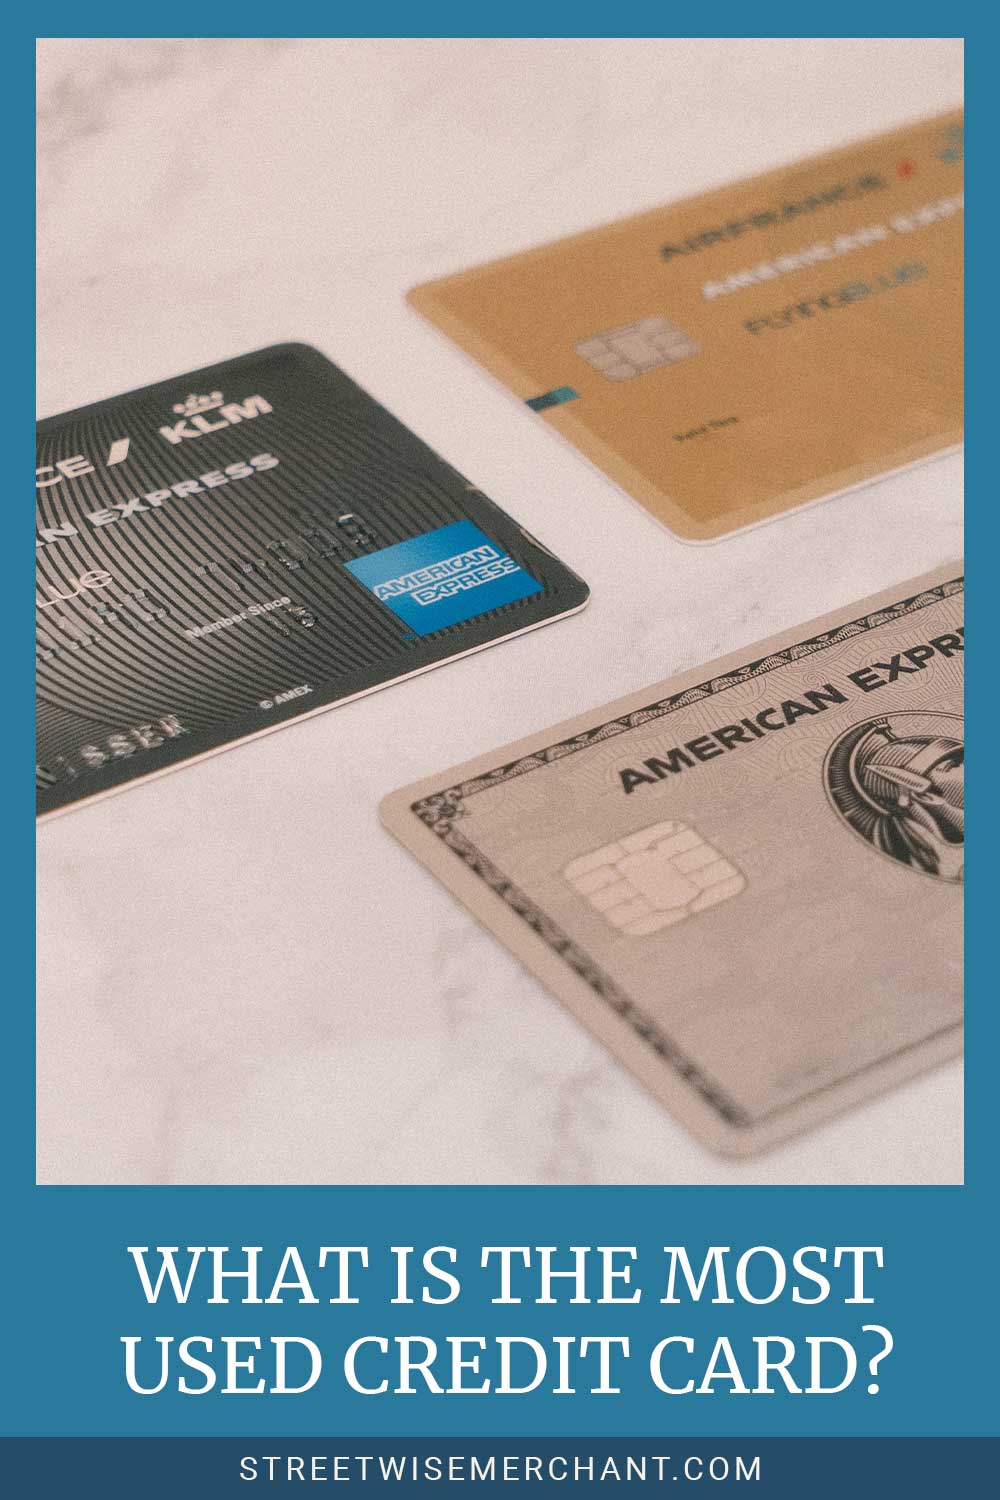 Three credit cards on a white surface - What is the Most Used Credit Card?